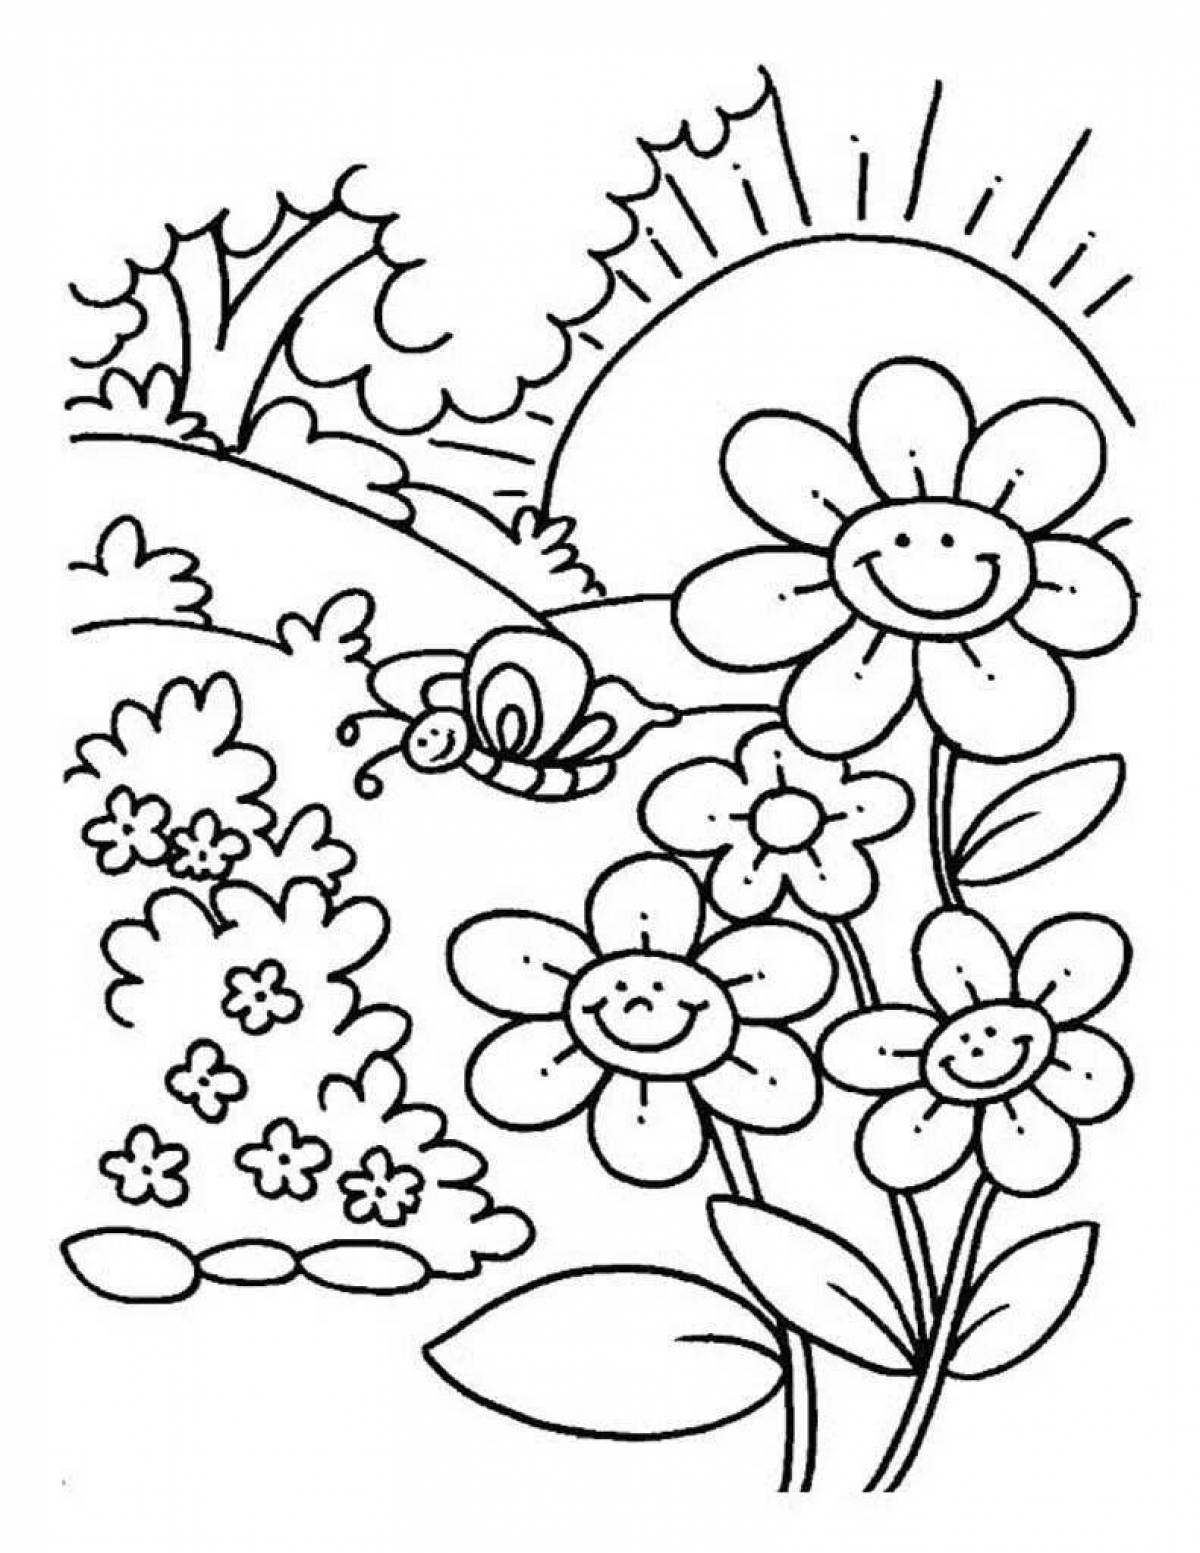 Coloring page lush summer nature